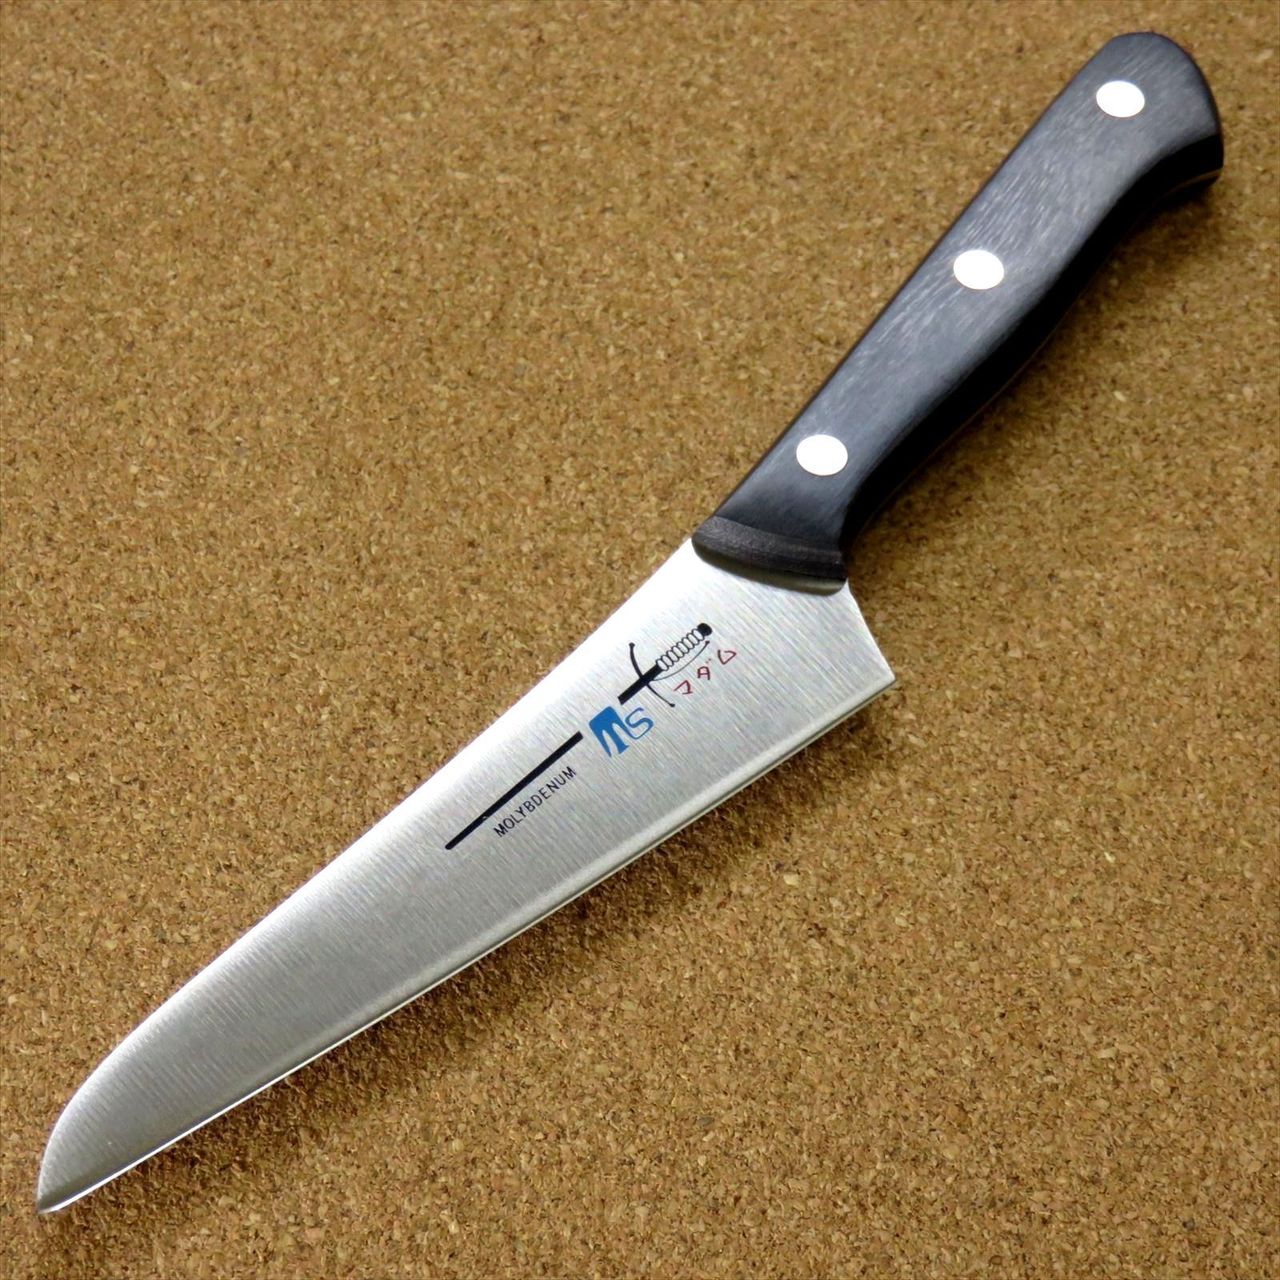 Japanese knife for cutting fruit and vegetable